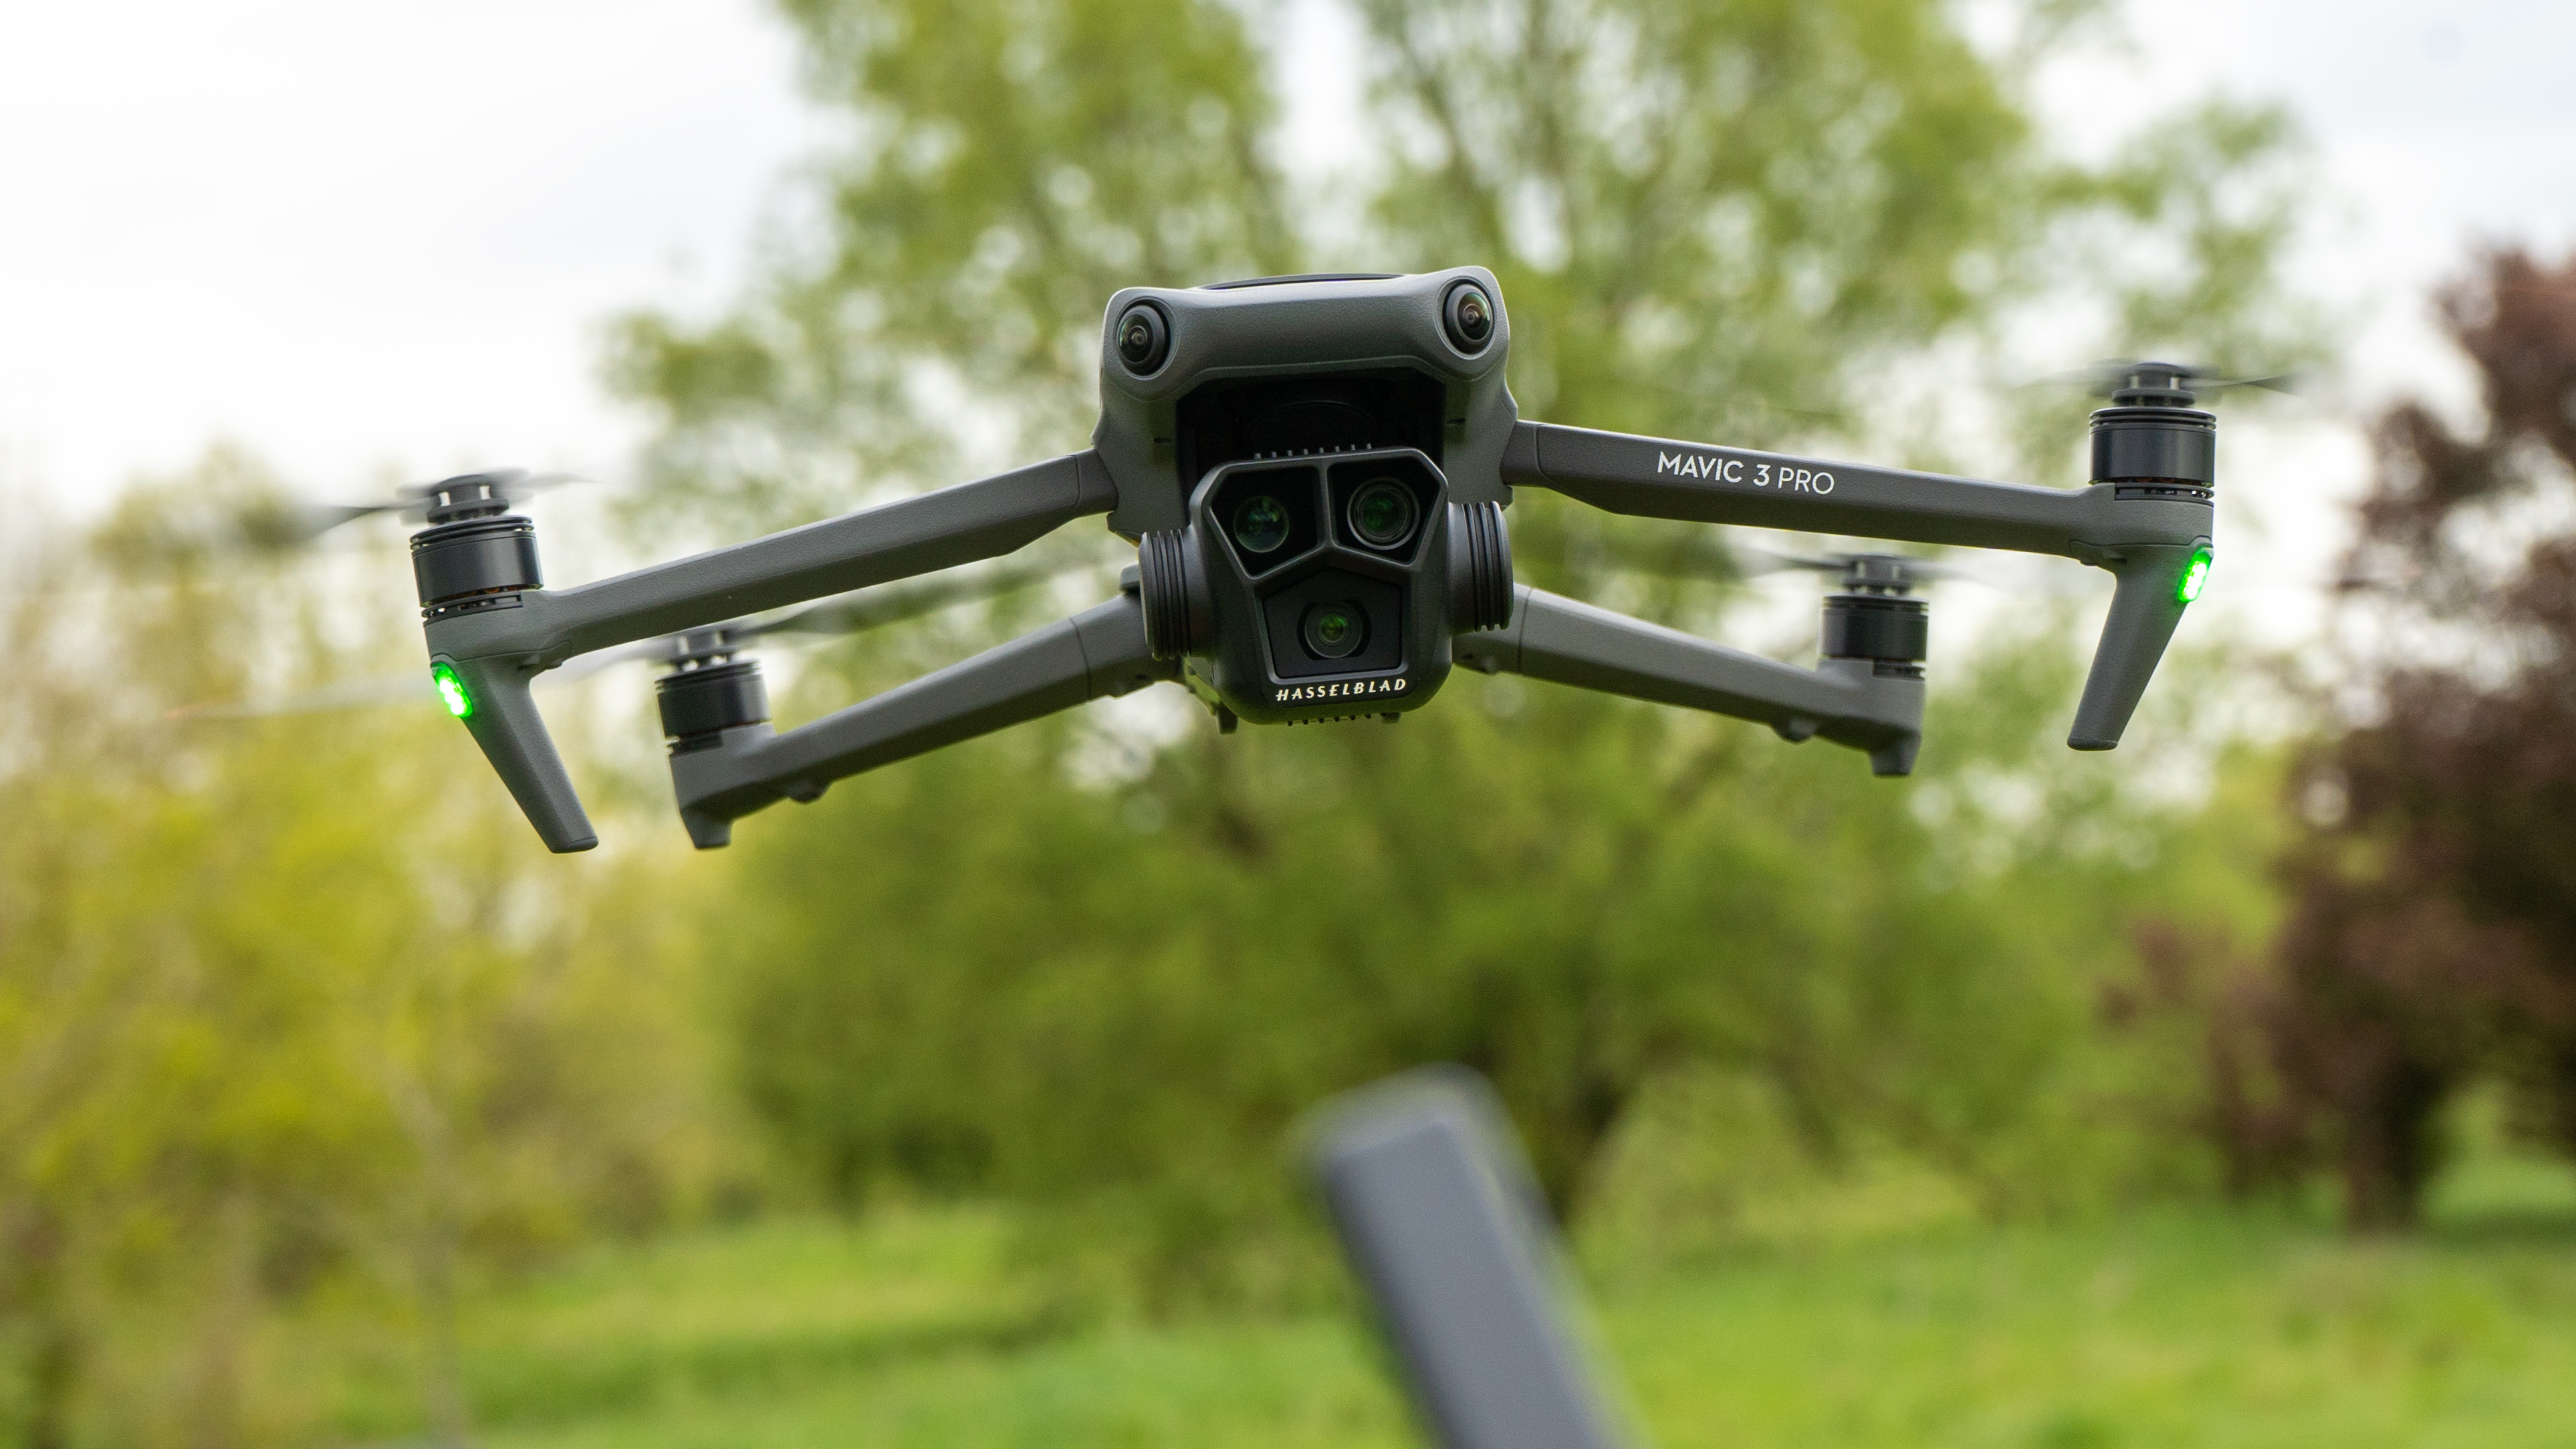 DJI Mavic 3 Pro review: can the three-eyed drone see all you need?